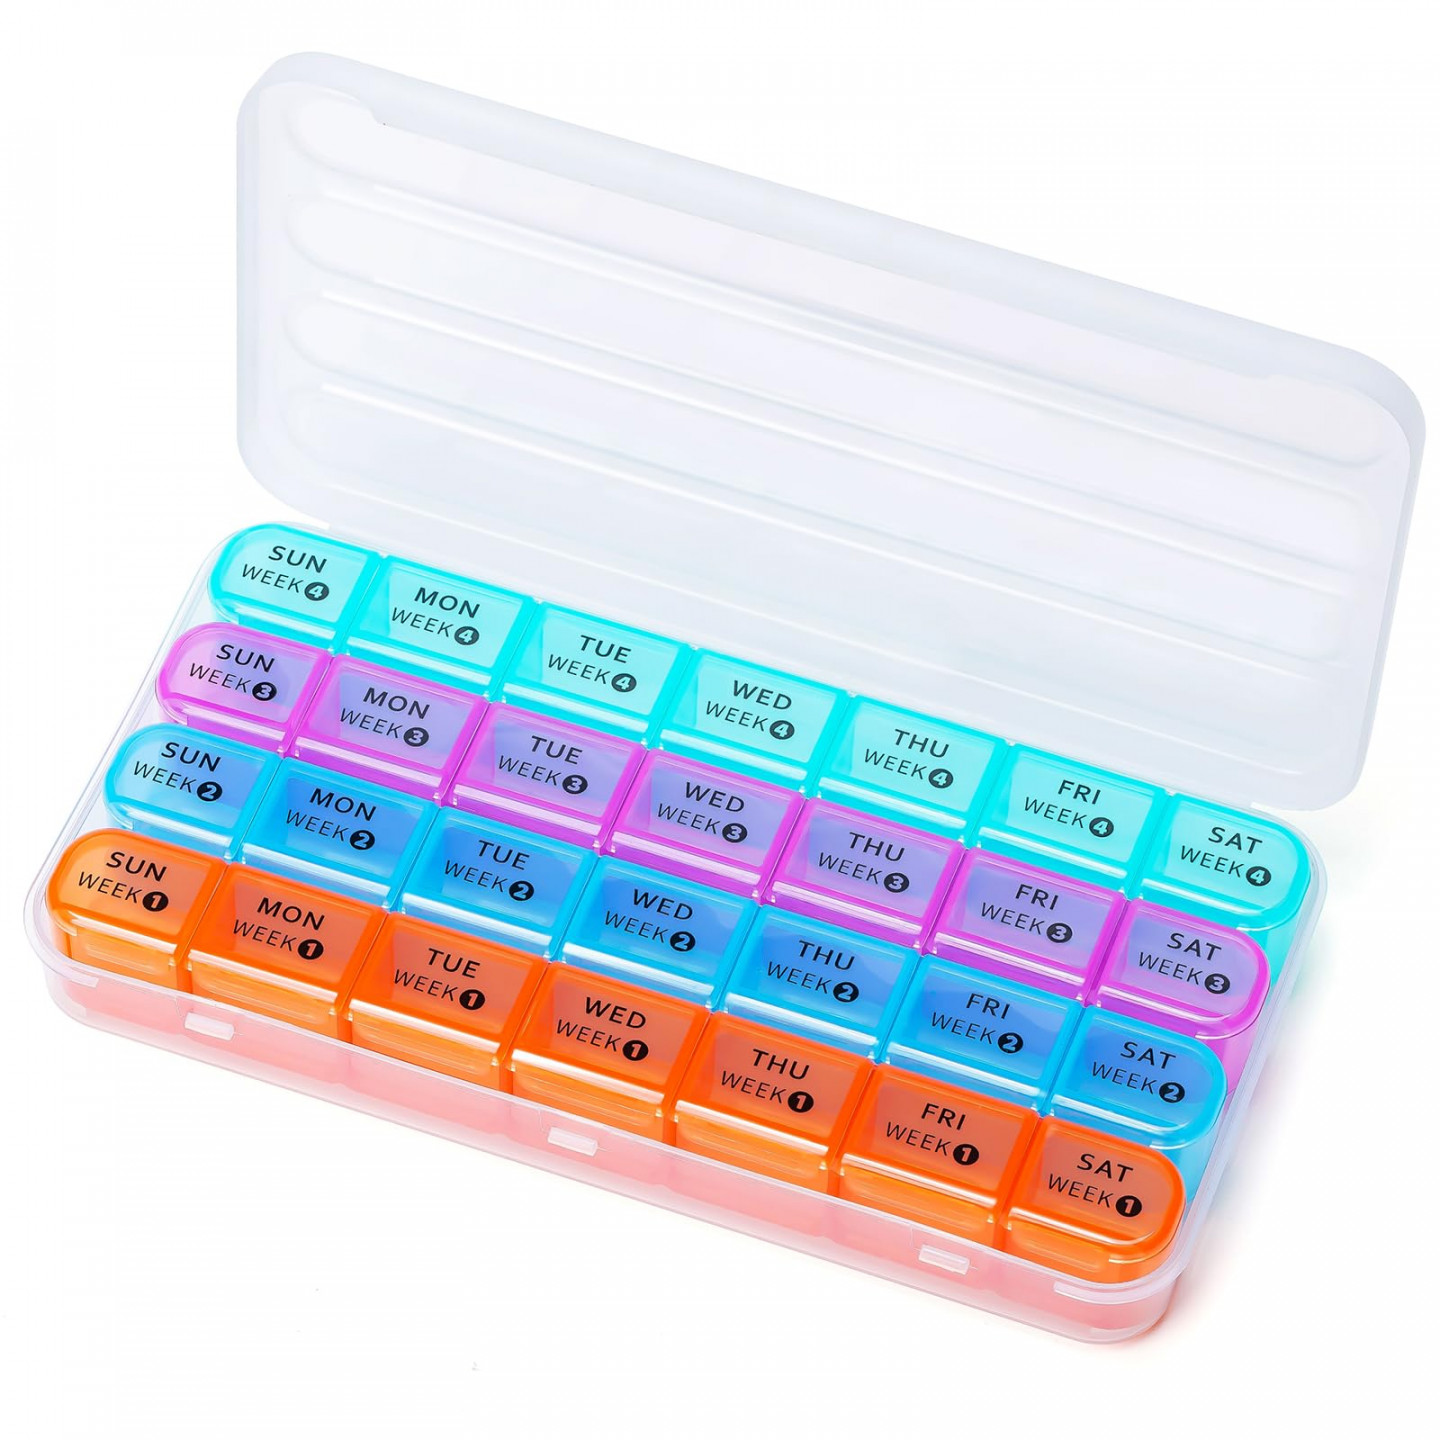 Day Monthly Pill Organizer - Weekly Pill Box  Time a Day,  Weeks Large  Pill Case for Traveling, Big Compartment Personal Pill Organizers for